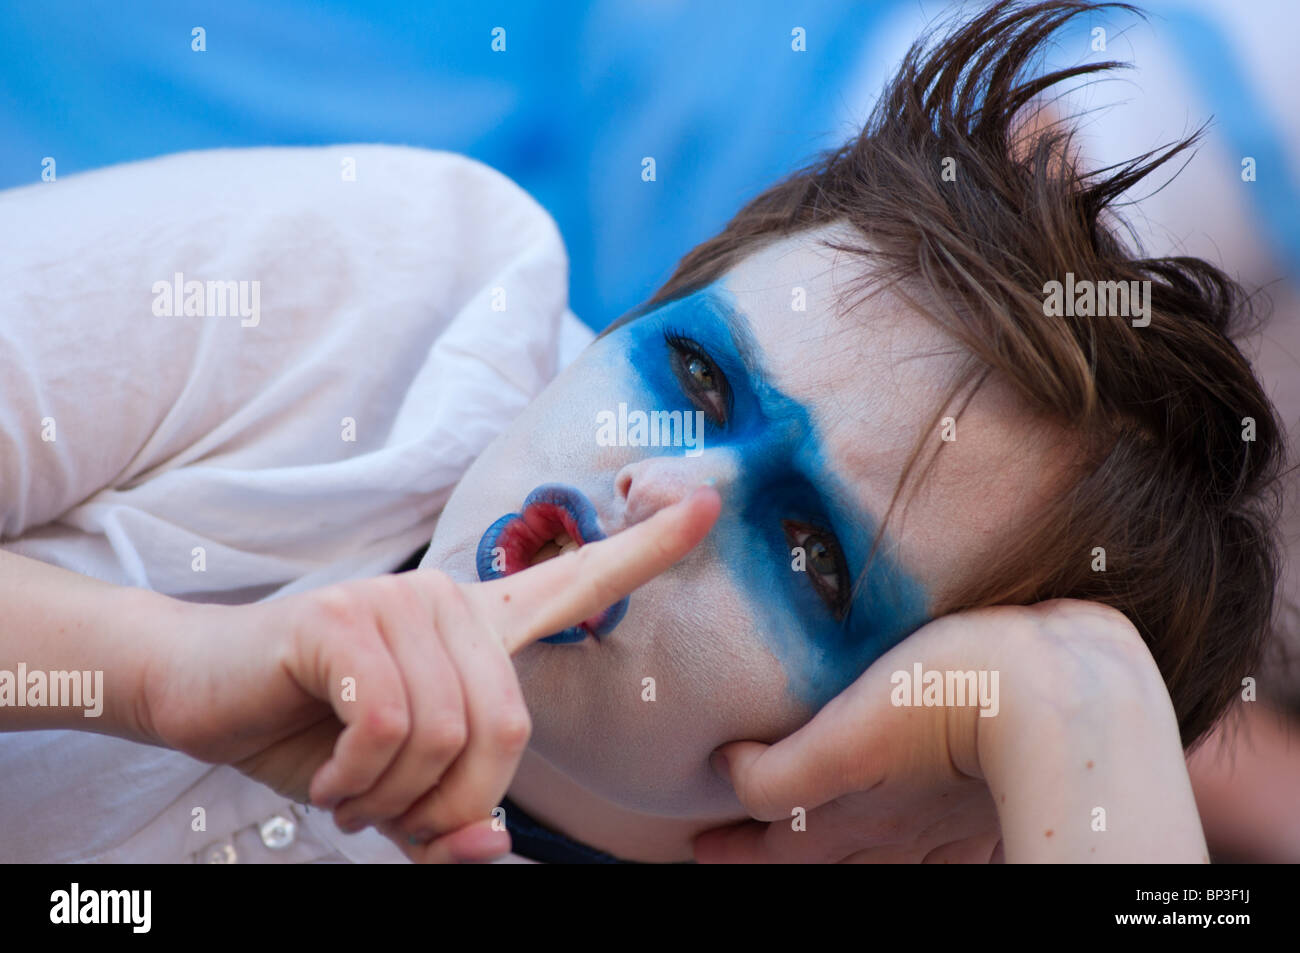 Performer at Edinburgh's fringe festival with face painted in Scotland's national colours. Stock Photo